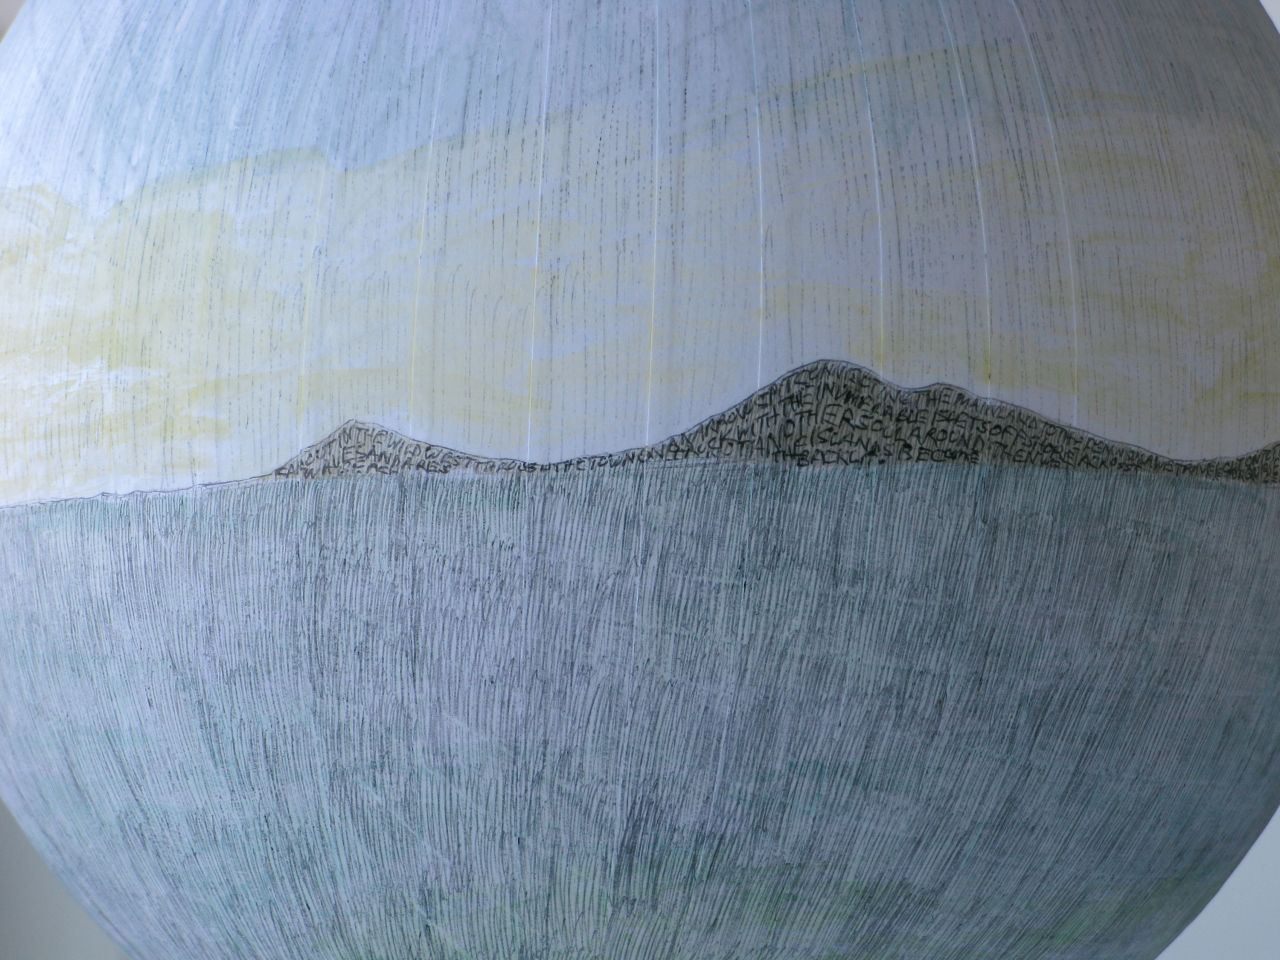 The Islets off Belmullet - Black Landscape Art by Russell Crotty